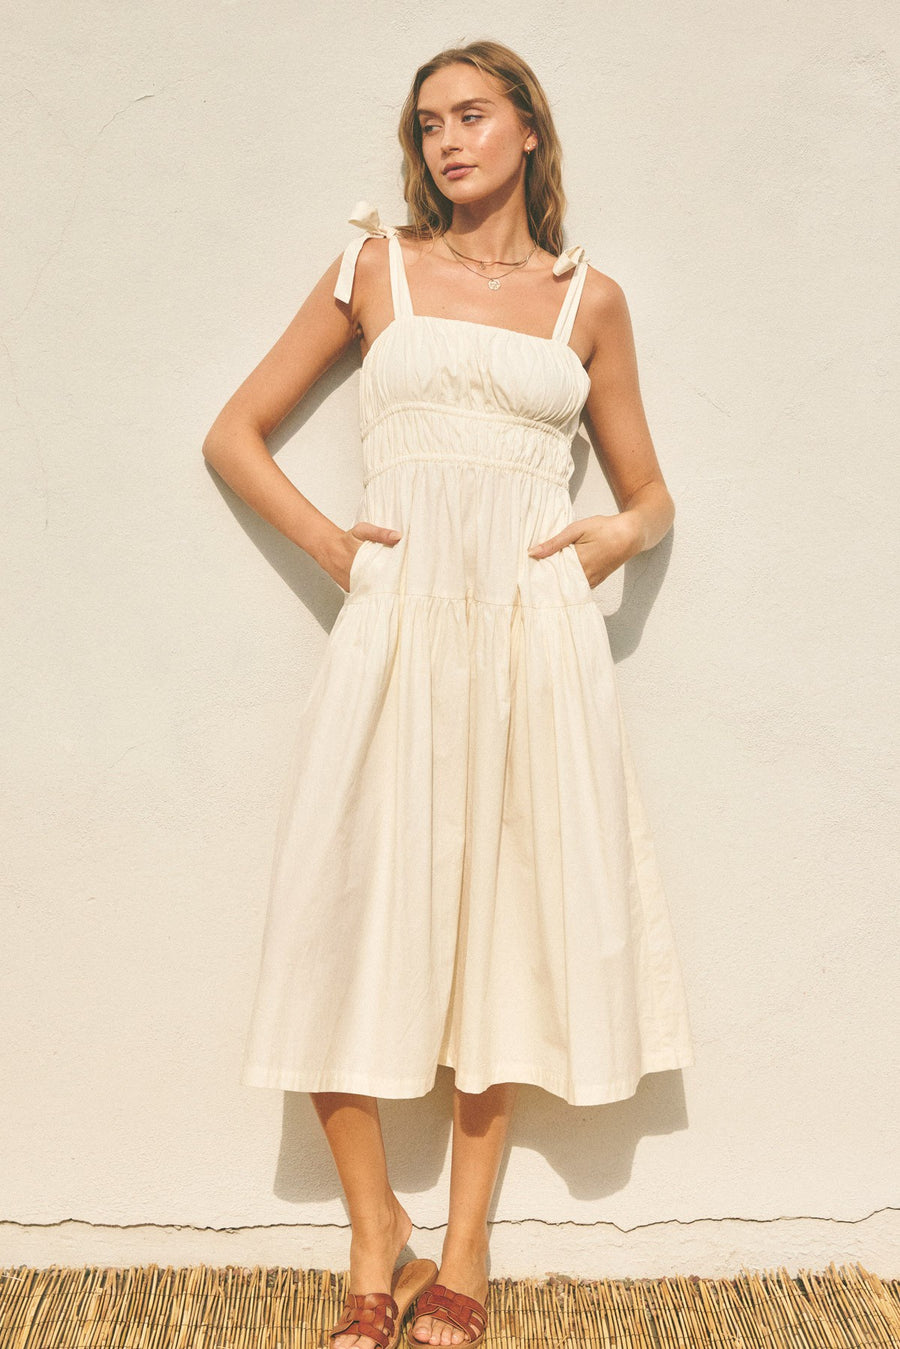 Featuring an adjustable tie strap flare midi dress with a square neck and sinching along the middle and pockets on each side in the color eggshell